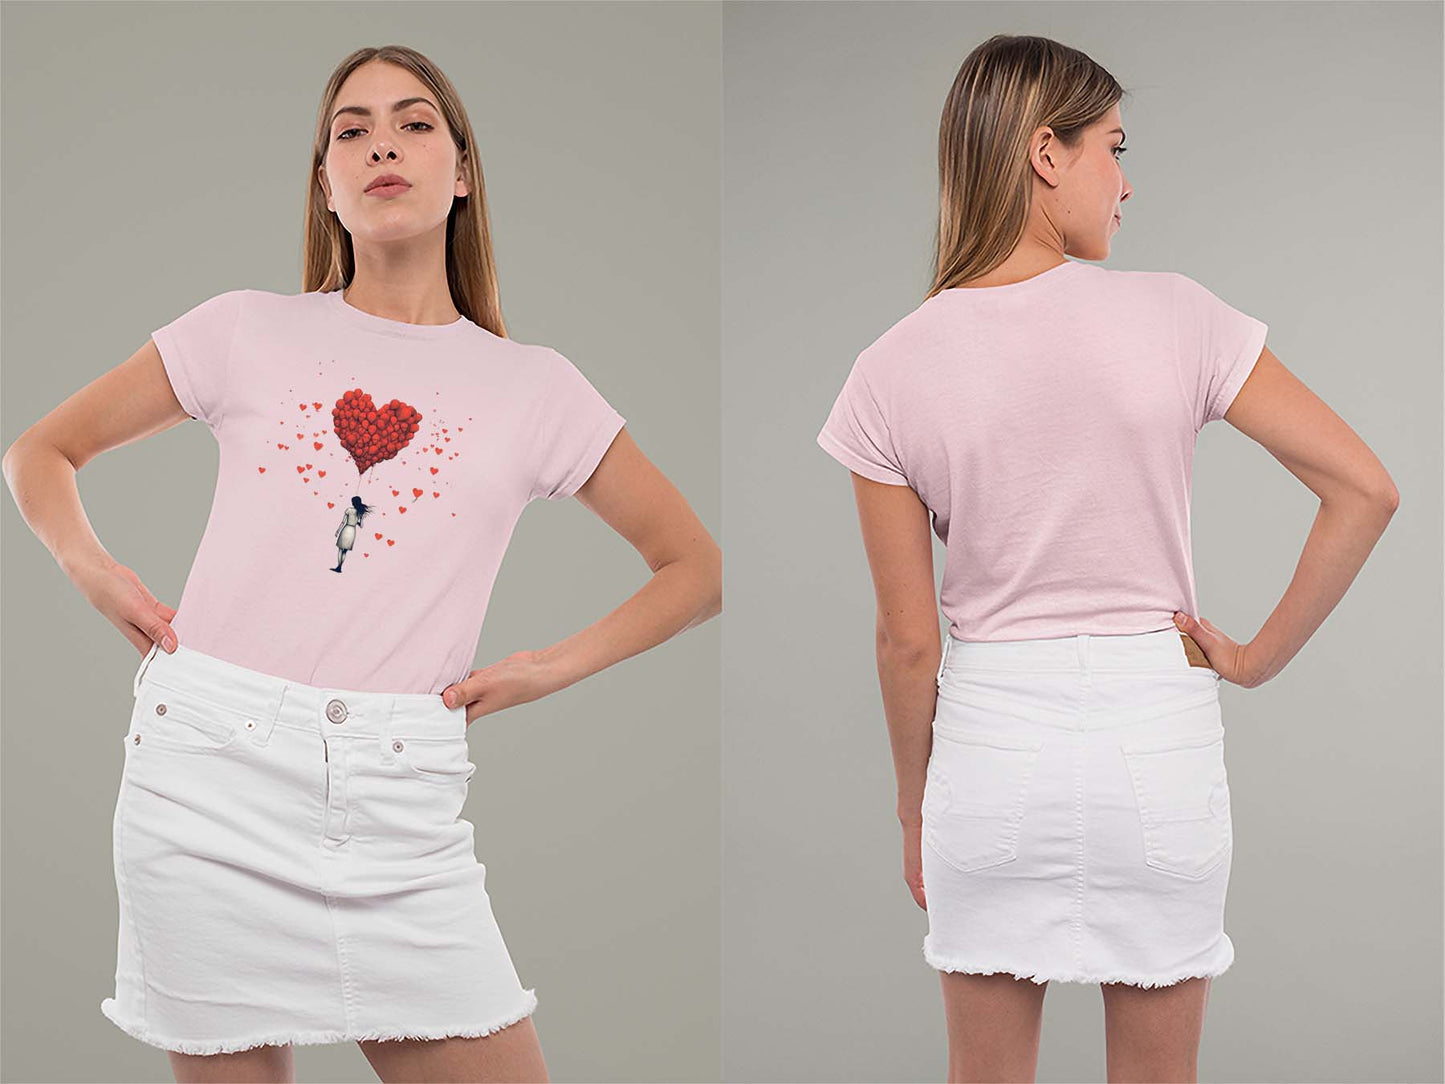 Fat Dave Balloon Hearts Ladies Crew (Round) Neck Shirt Small Light Pink